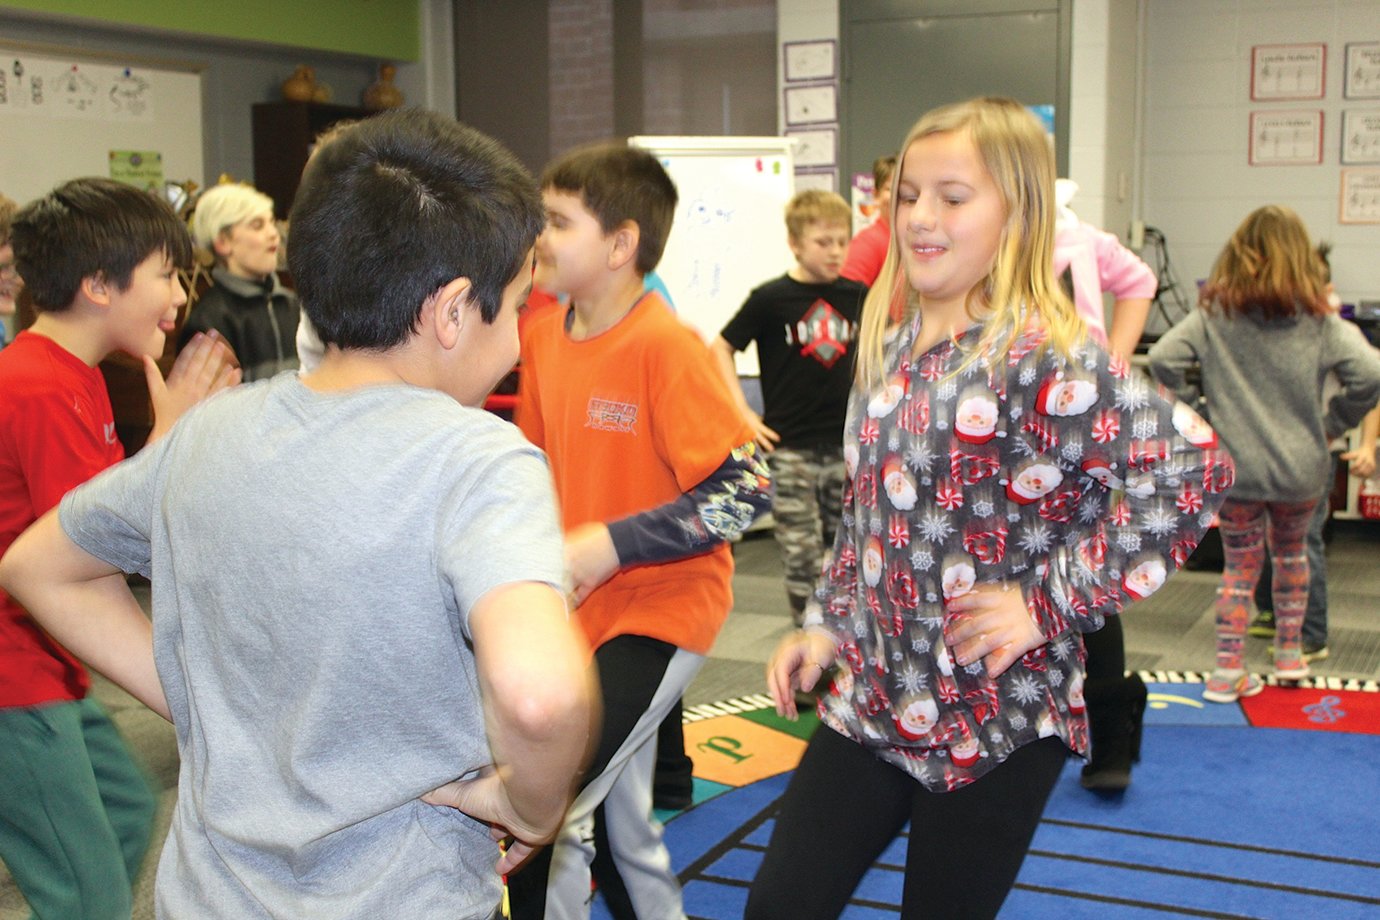 Ladoga Elementary music student Kaylee Wallace tries to mirror the moves of her dancing partner.